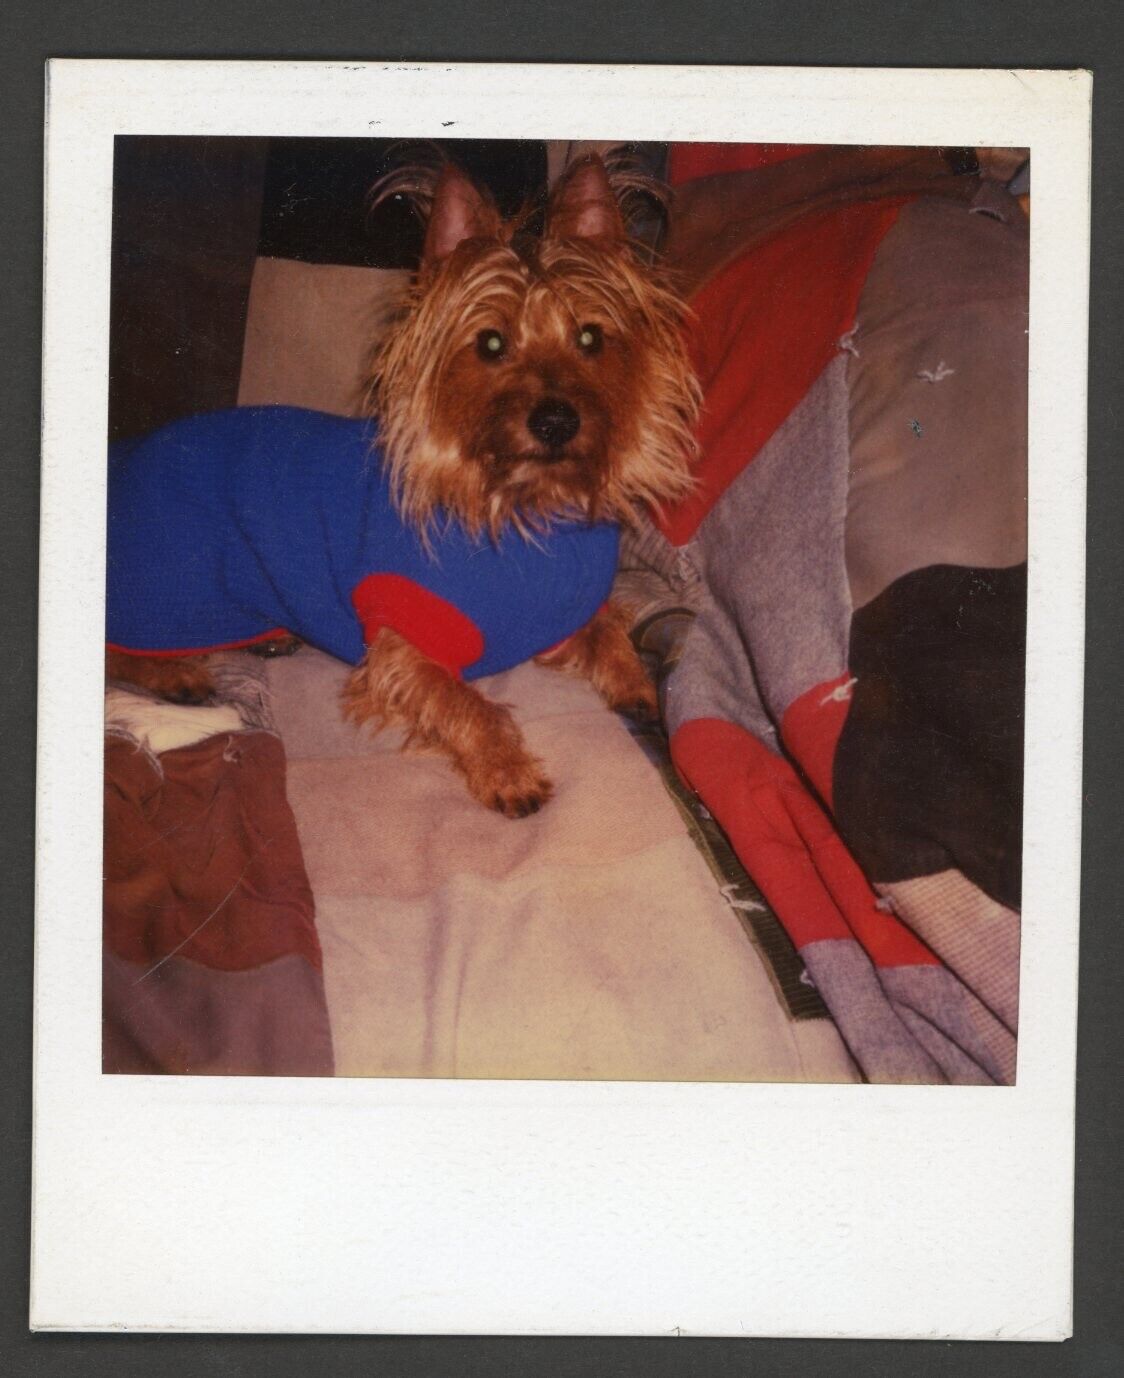 Cute Sweater Wearing Dog Yorkshire Terrier Yorkie Portrait Instant Photo 1980s